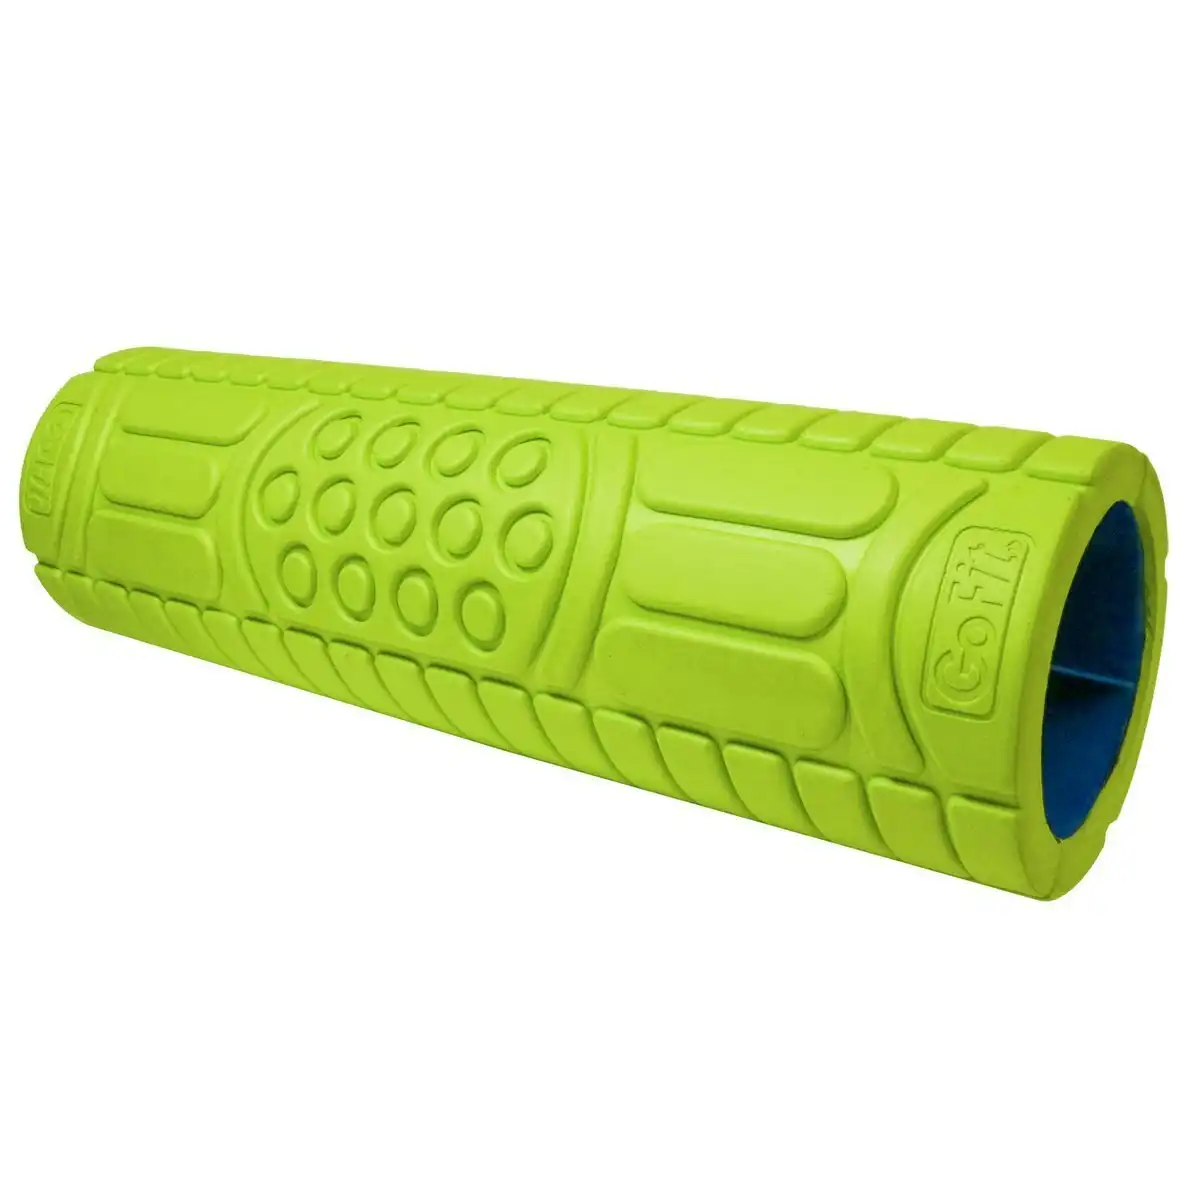 Gofit 45.7cm Sports Gym Fitness/Muscle Massage Recovery Massager/Roller Green